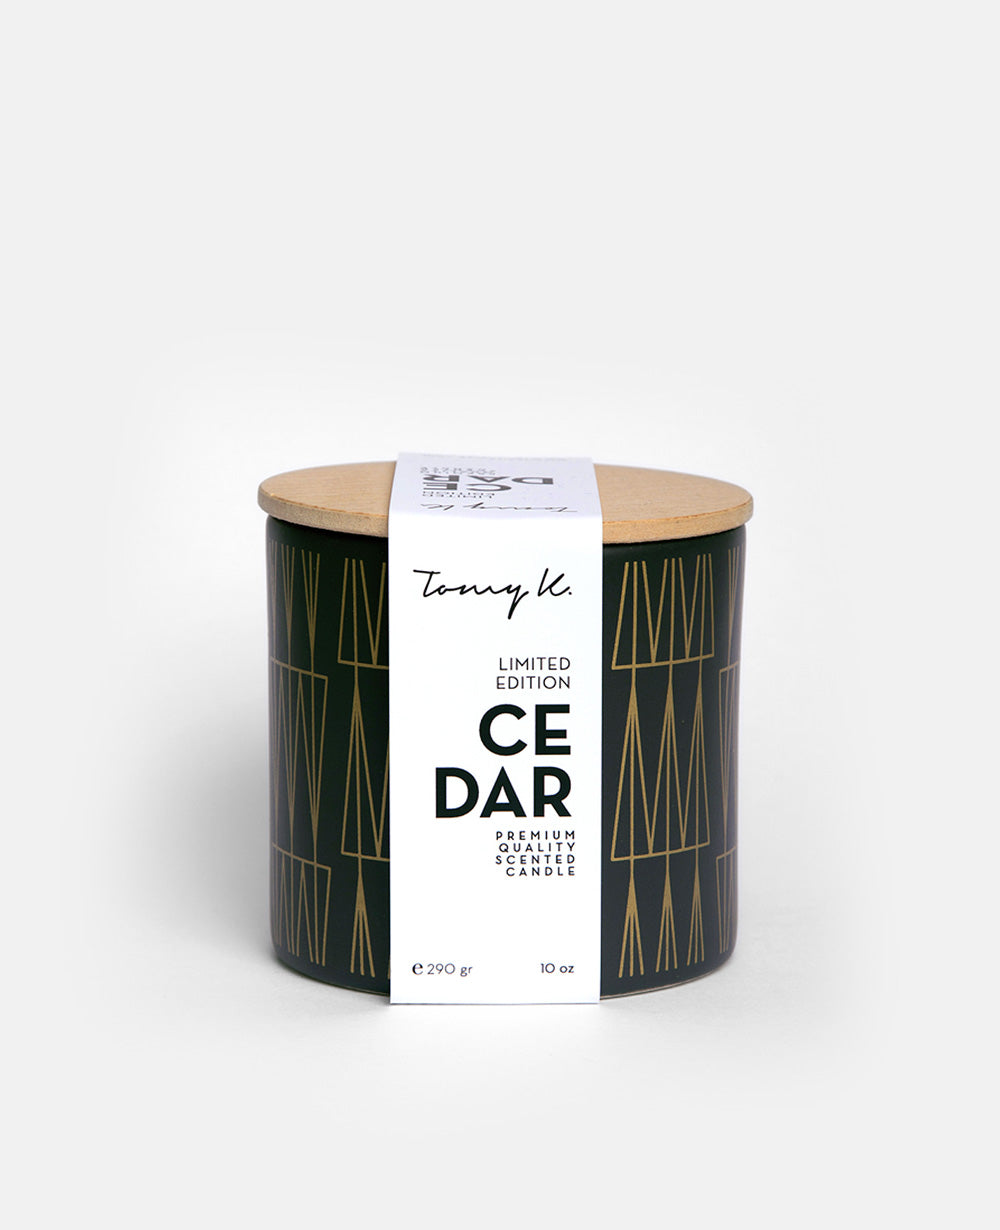 SCENTED CANDLE "CEDAR" LIMITED EDITION